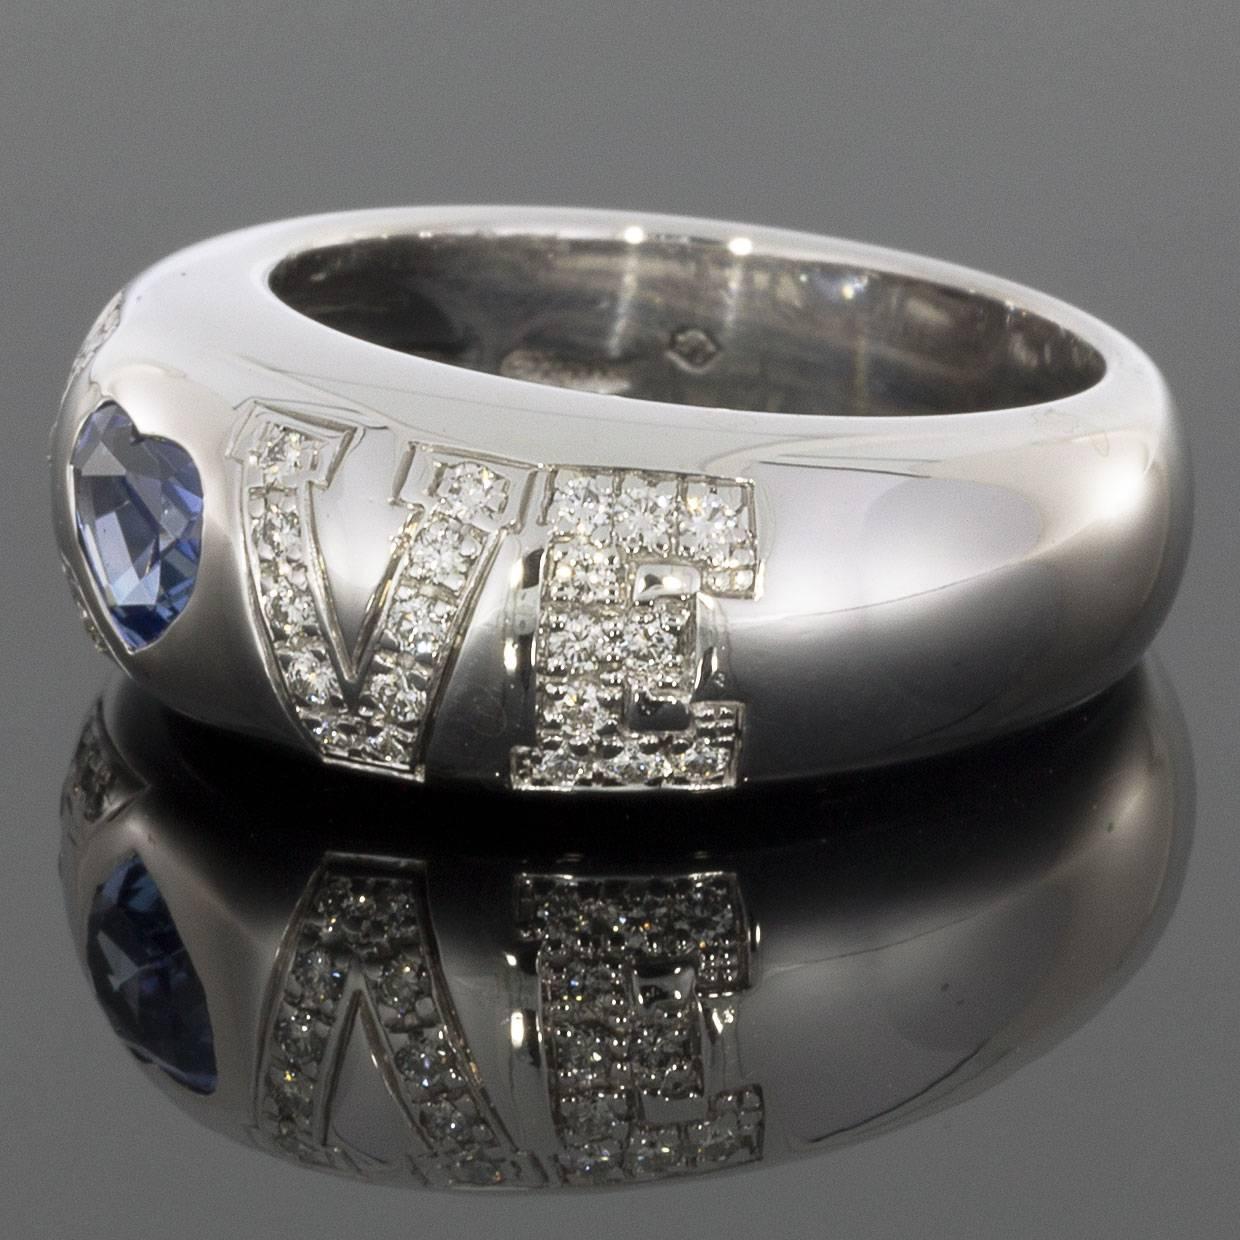 This Chopard LOVE ring is a 18k white gold band set with diamonds and a sapphire spelling the word 